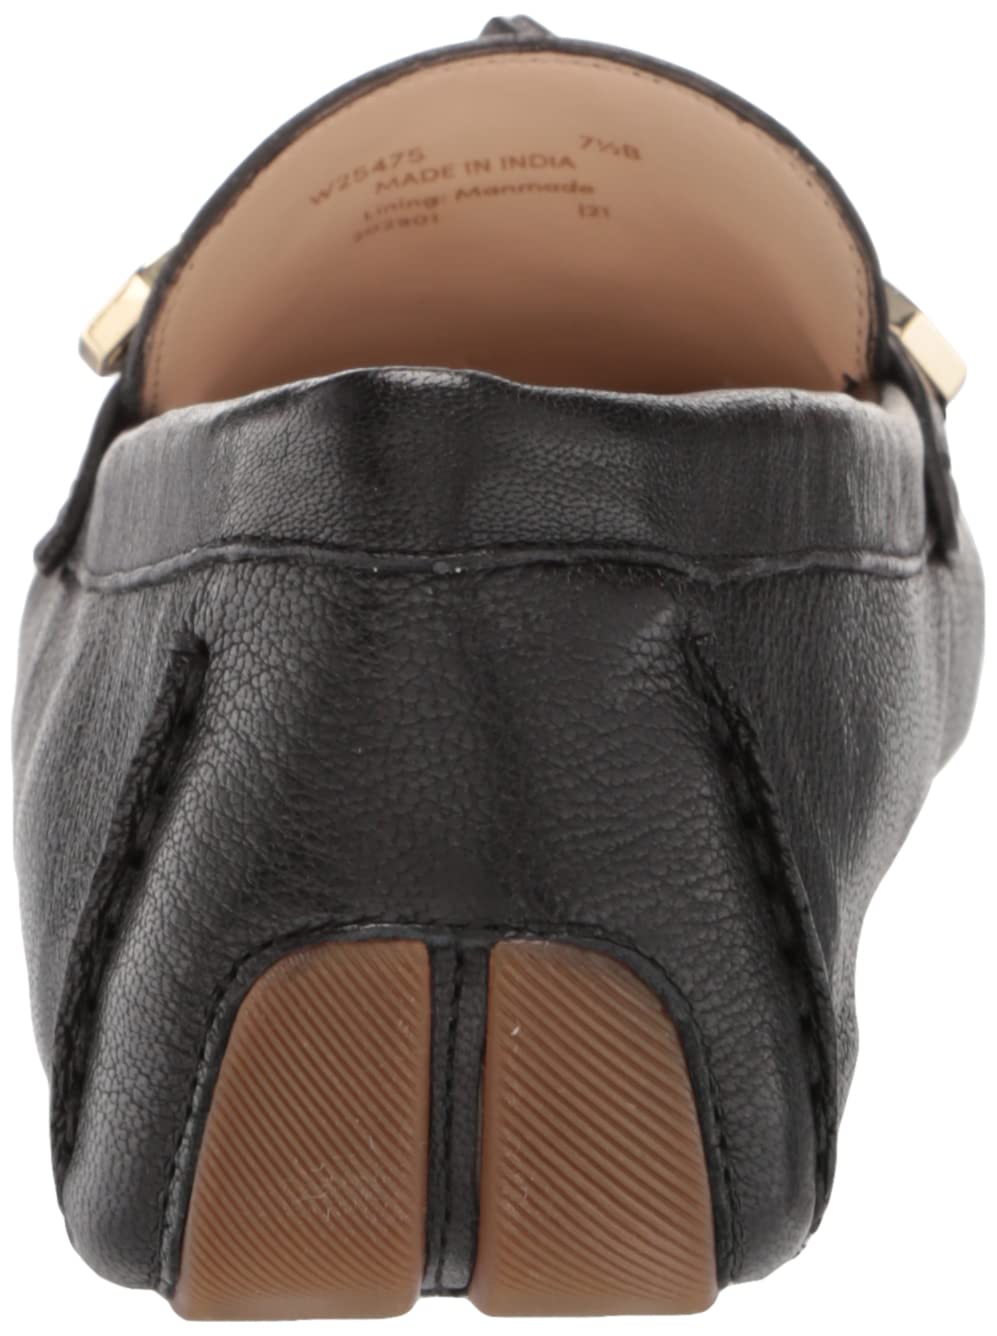 Cole Haan Women's Evelyn Bow Driver Driving Style Loafer